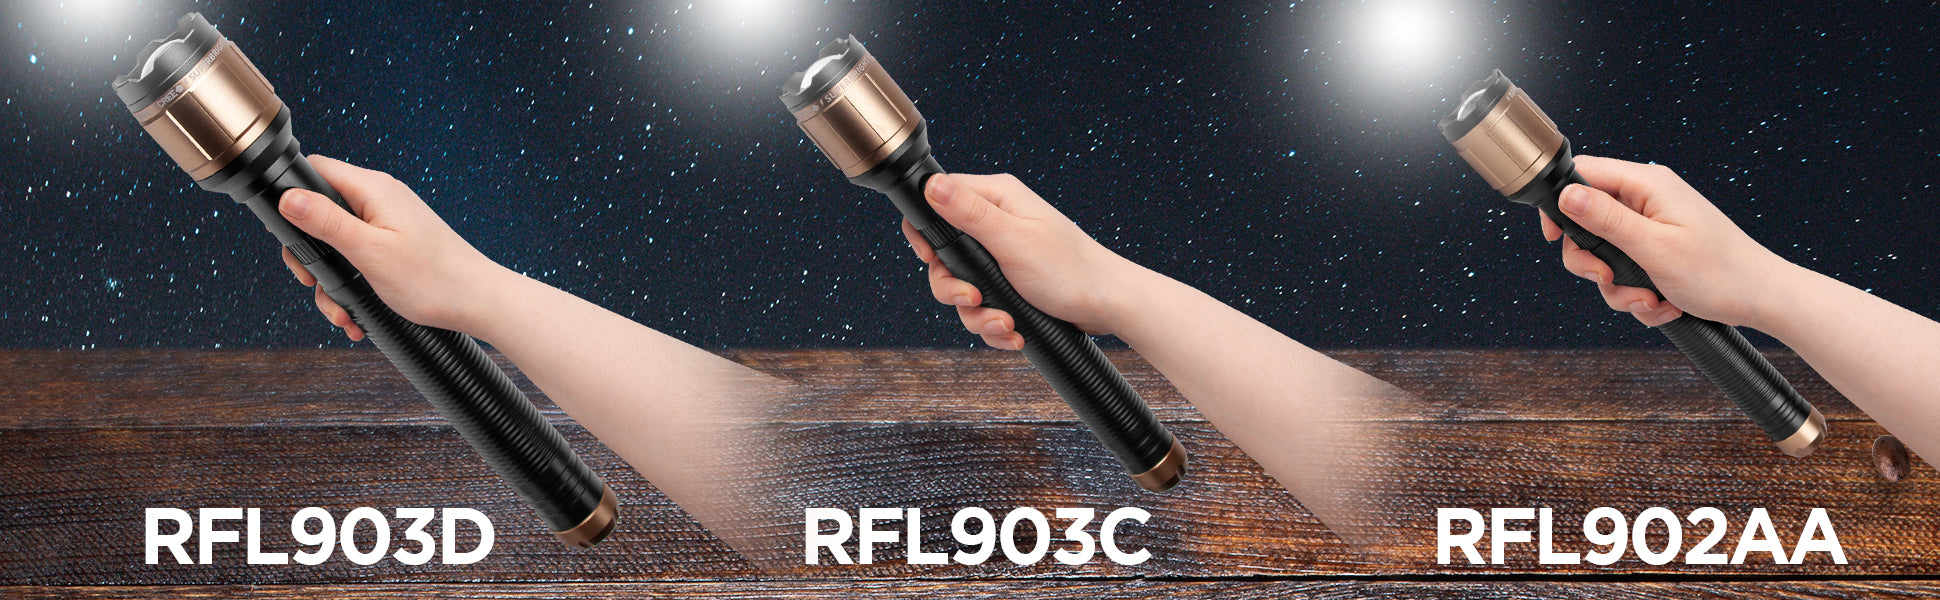 range of duronic torches shown: RFL903D, RFL903C and RFL902AA